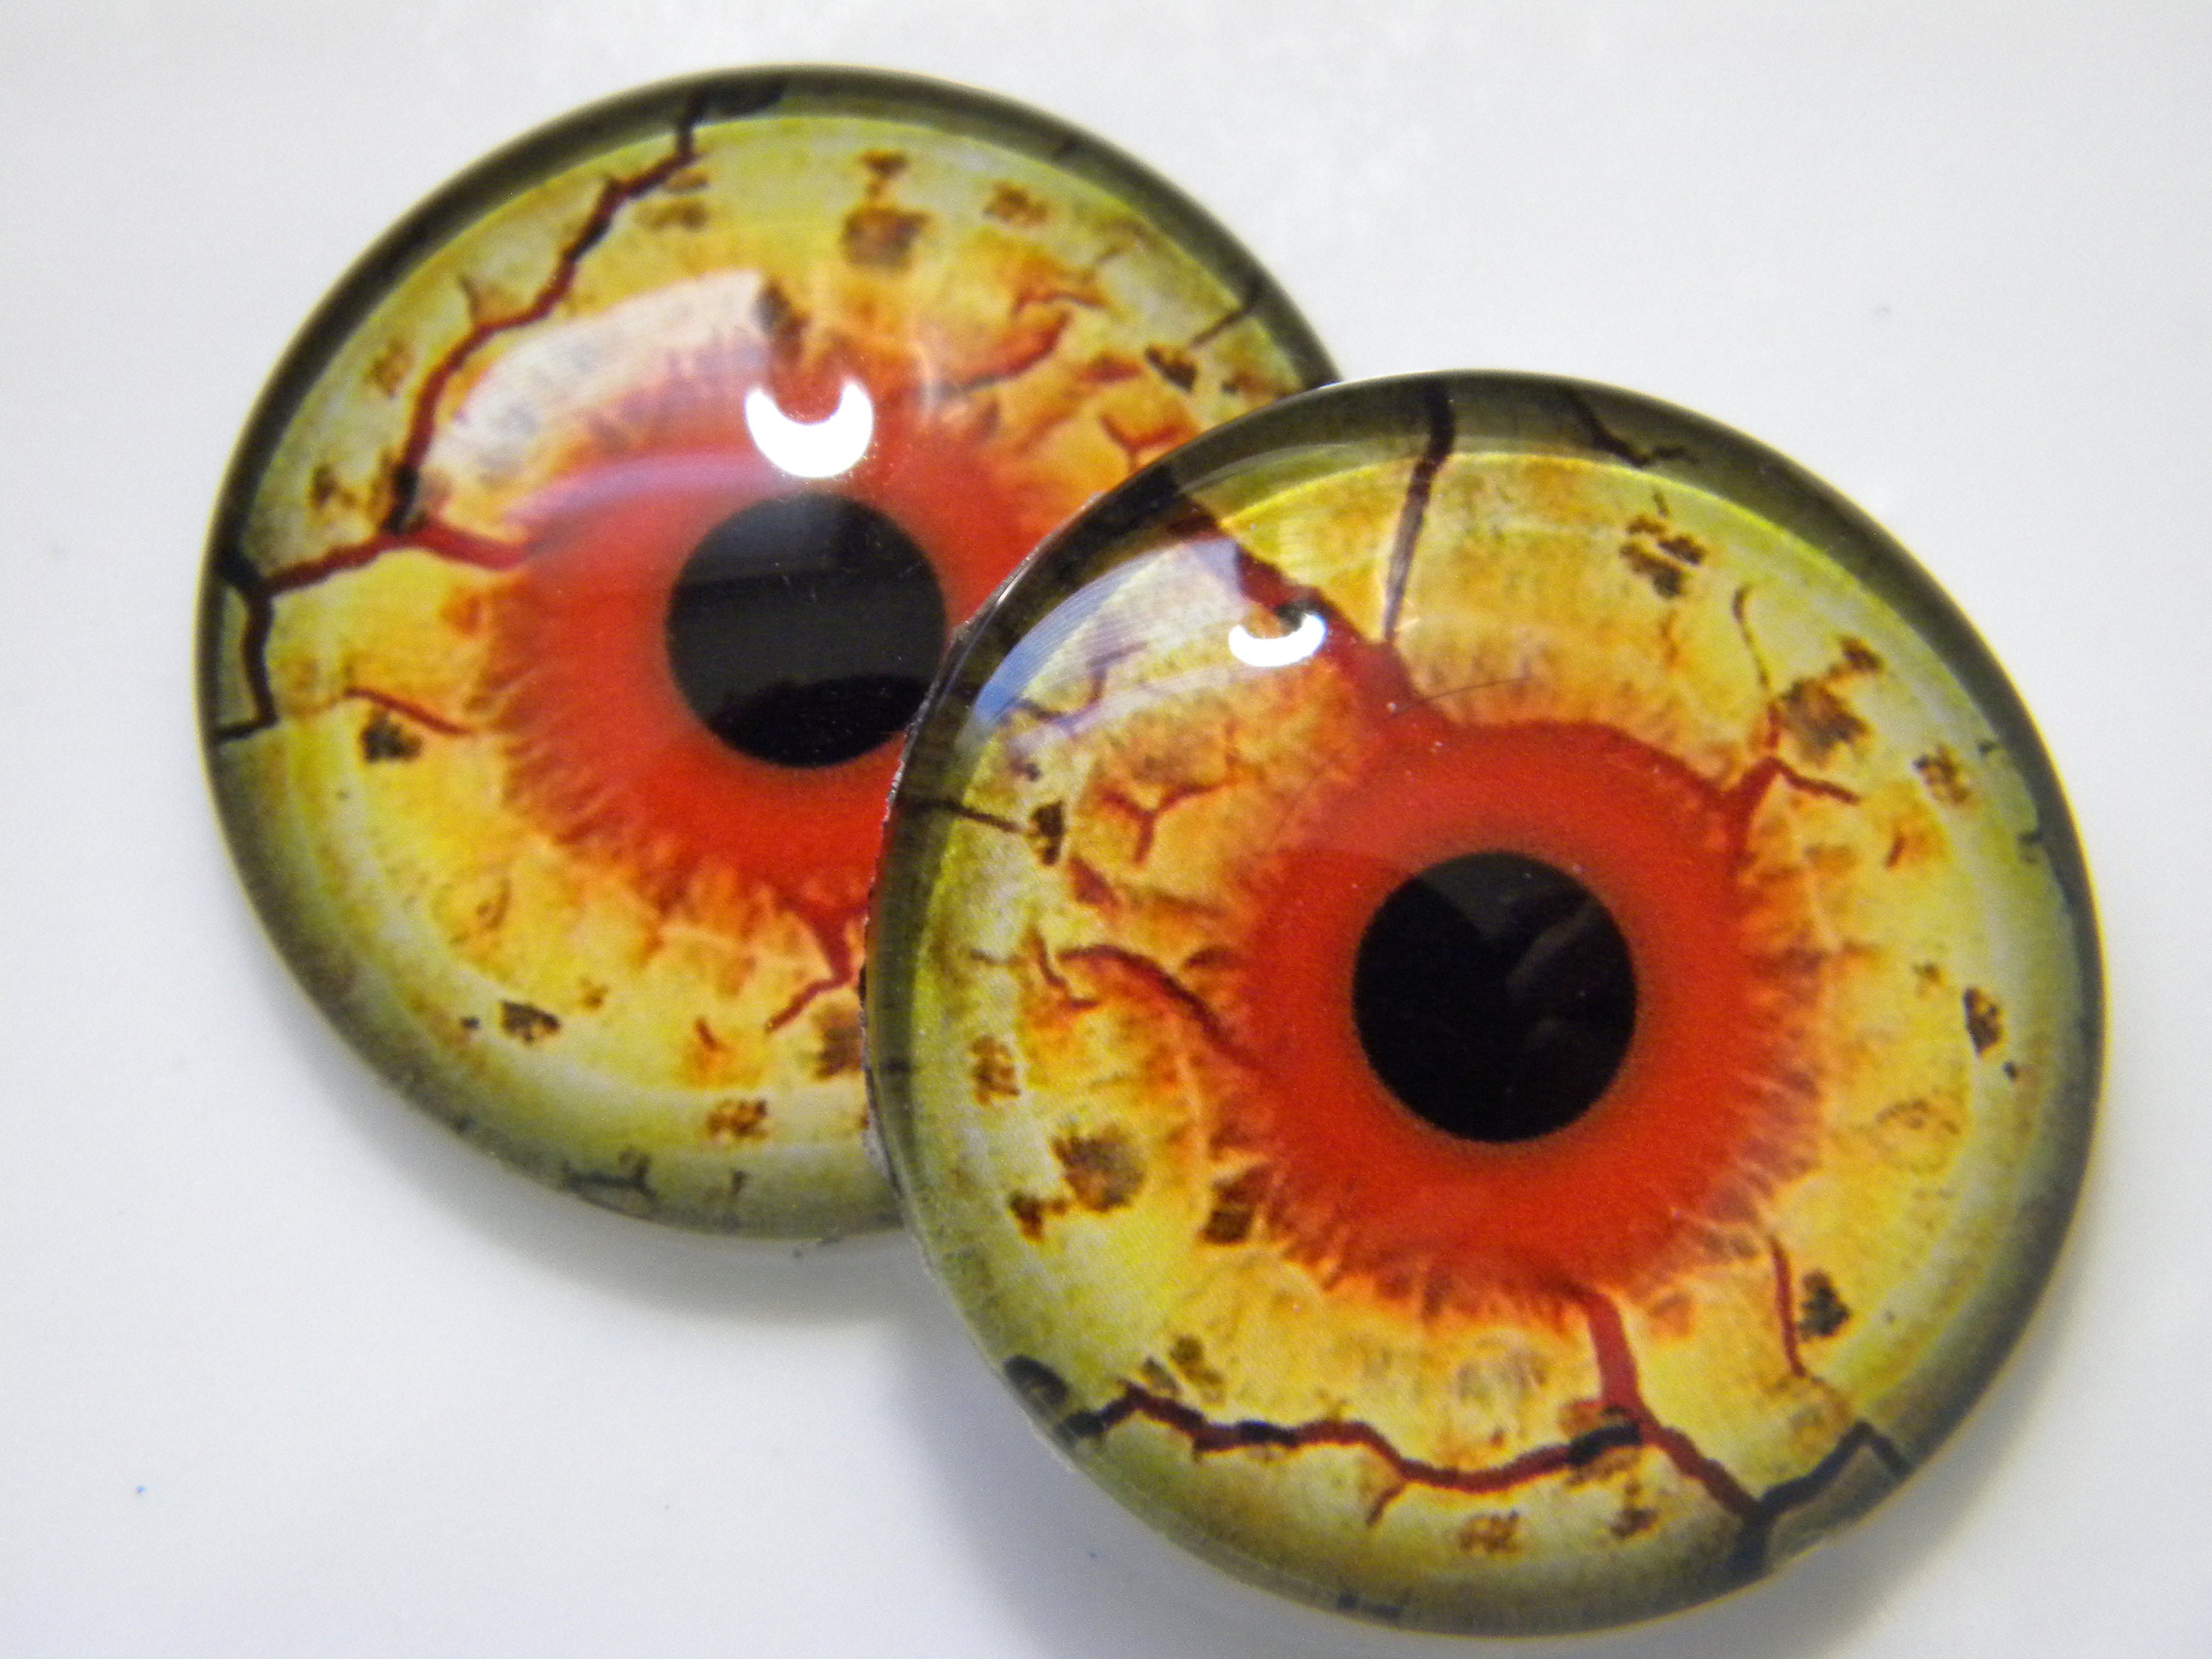 Glass Eyes, Gold Eyes, Dragon Eyes, Creature Eyes, Gold Cat Eyes, Golden  Eyes for Sculptures, Crafts, Etc. One Pair-choose Size From Menu. 